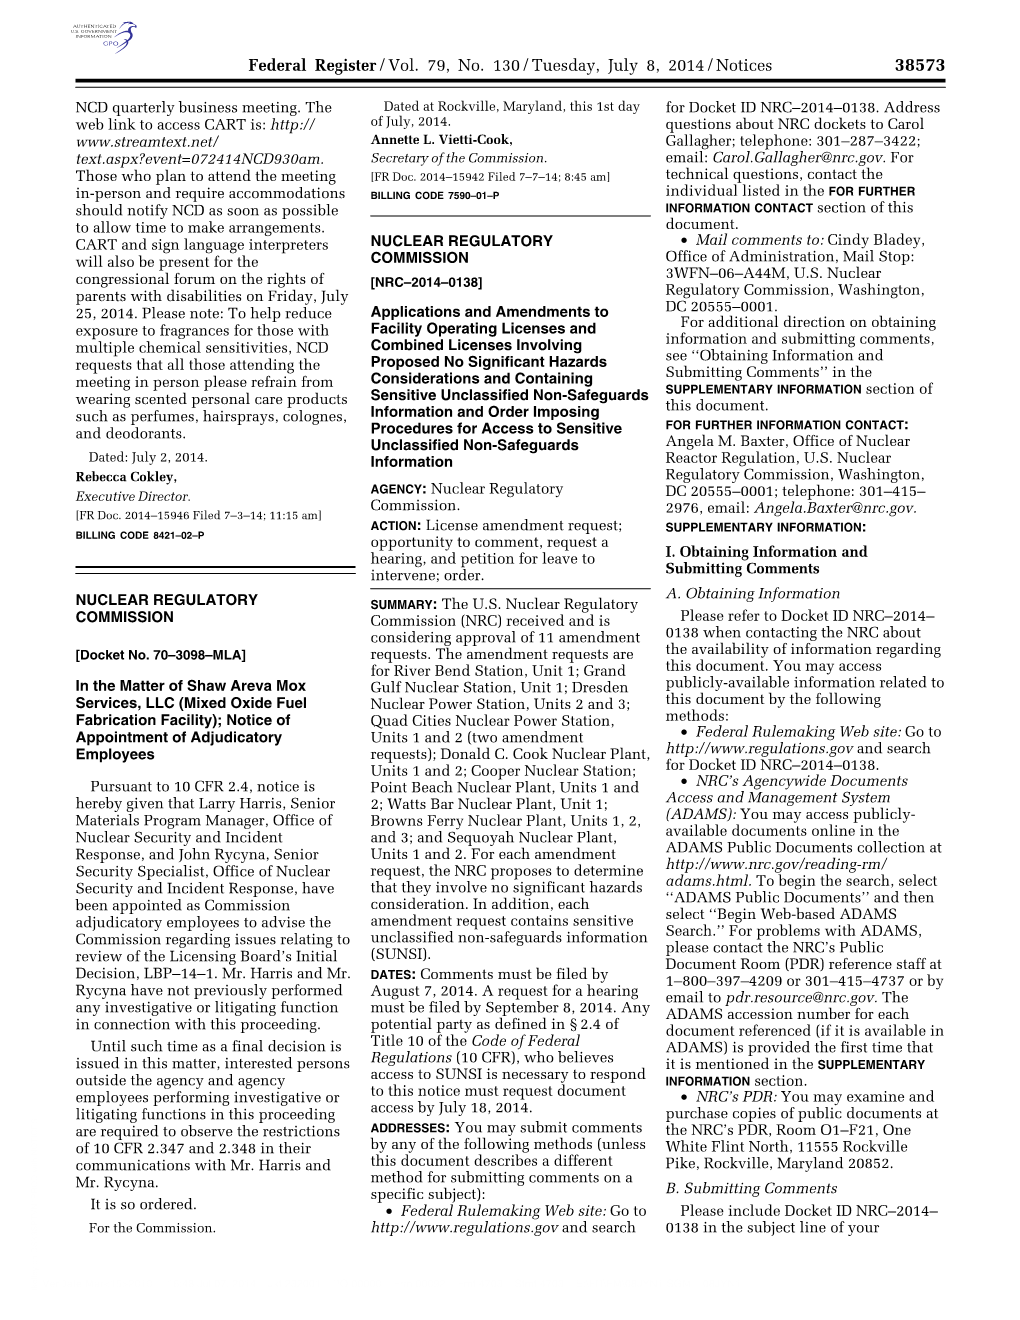 Federal Register/Vol. 79, No. 130/Tuesday, July 8, 2014/Notices